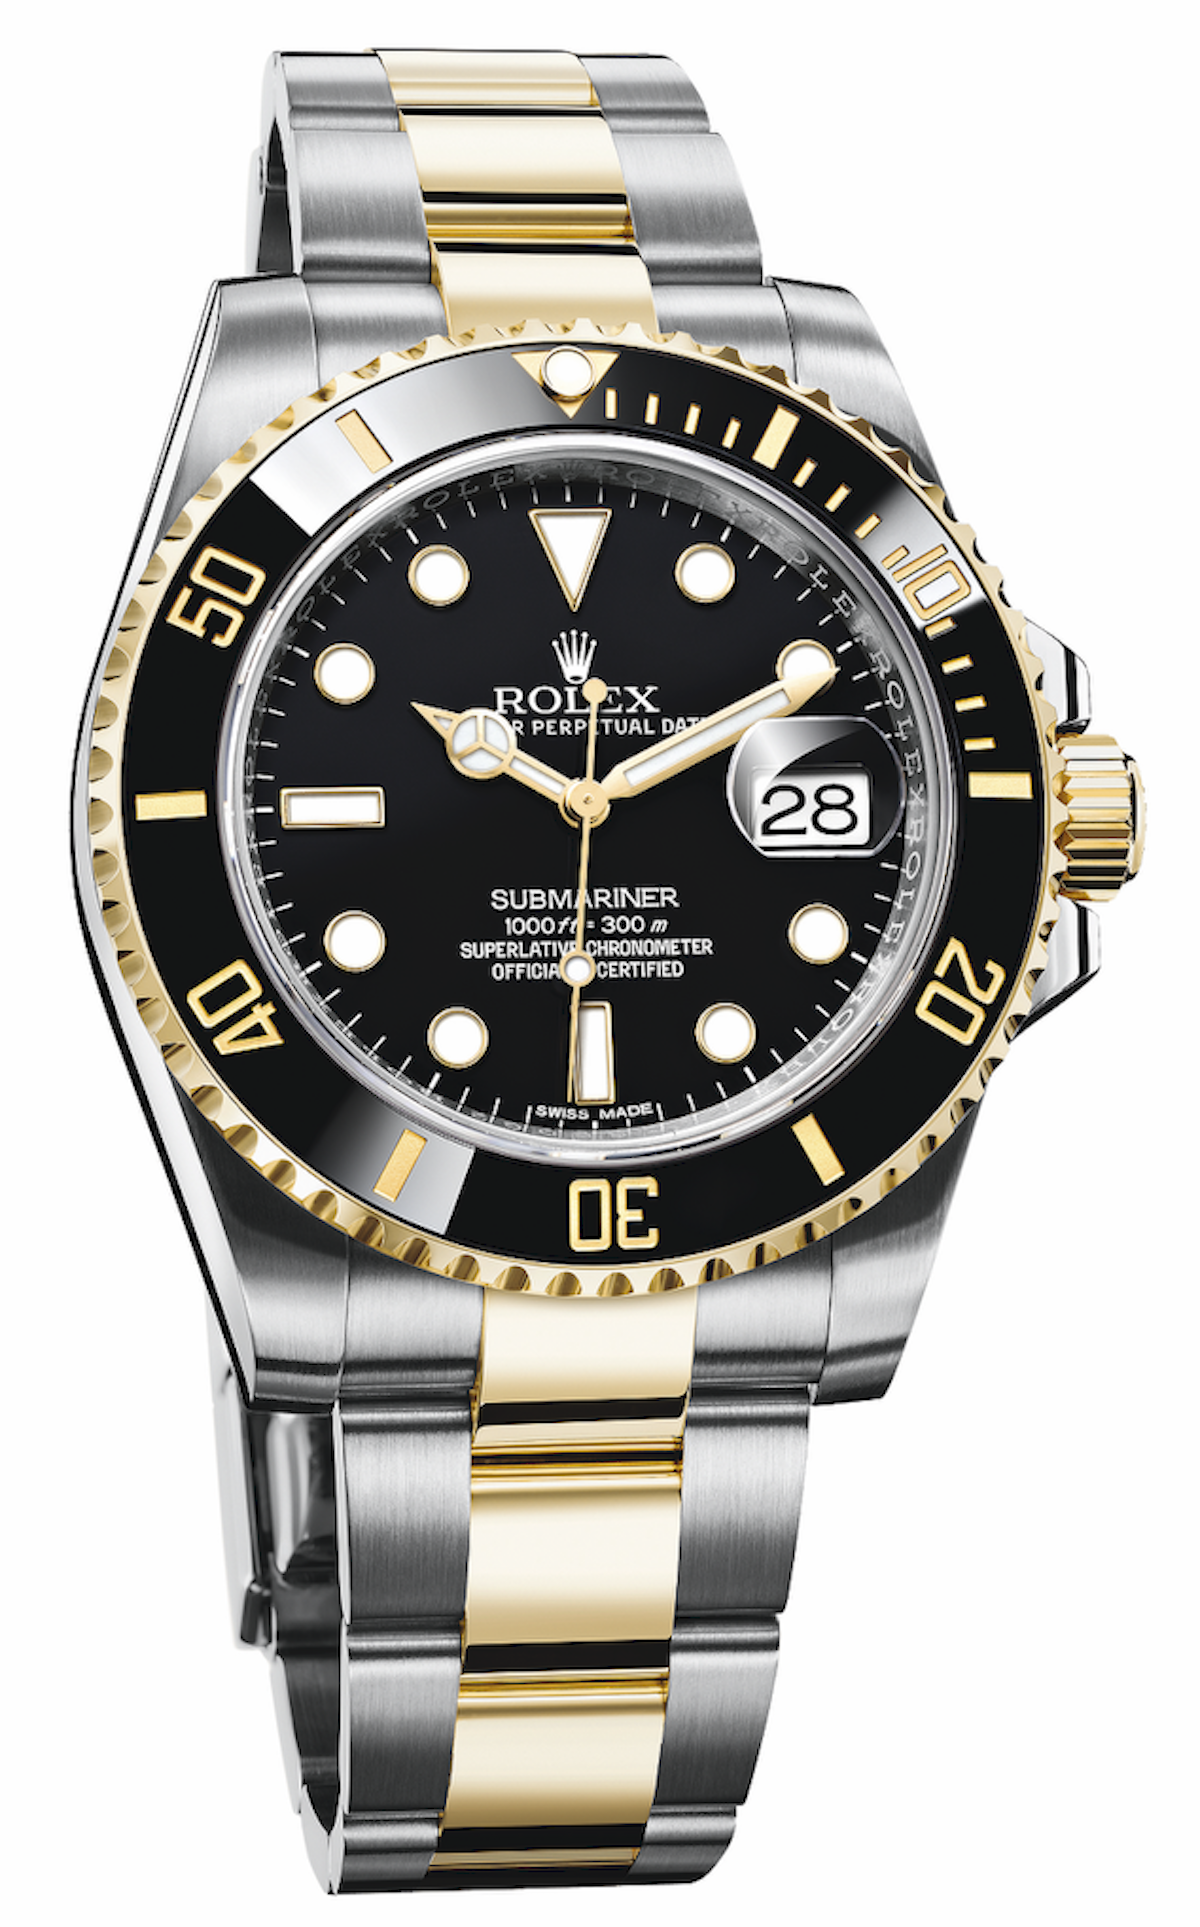 Rolex Submariner Review: A Dive Watch for Everyday Living